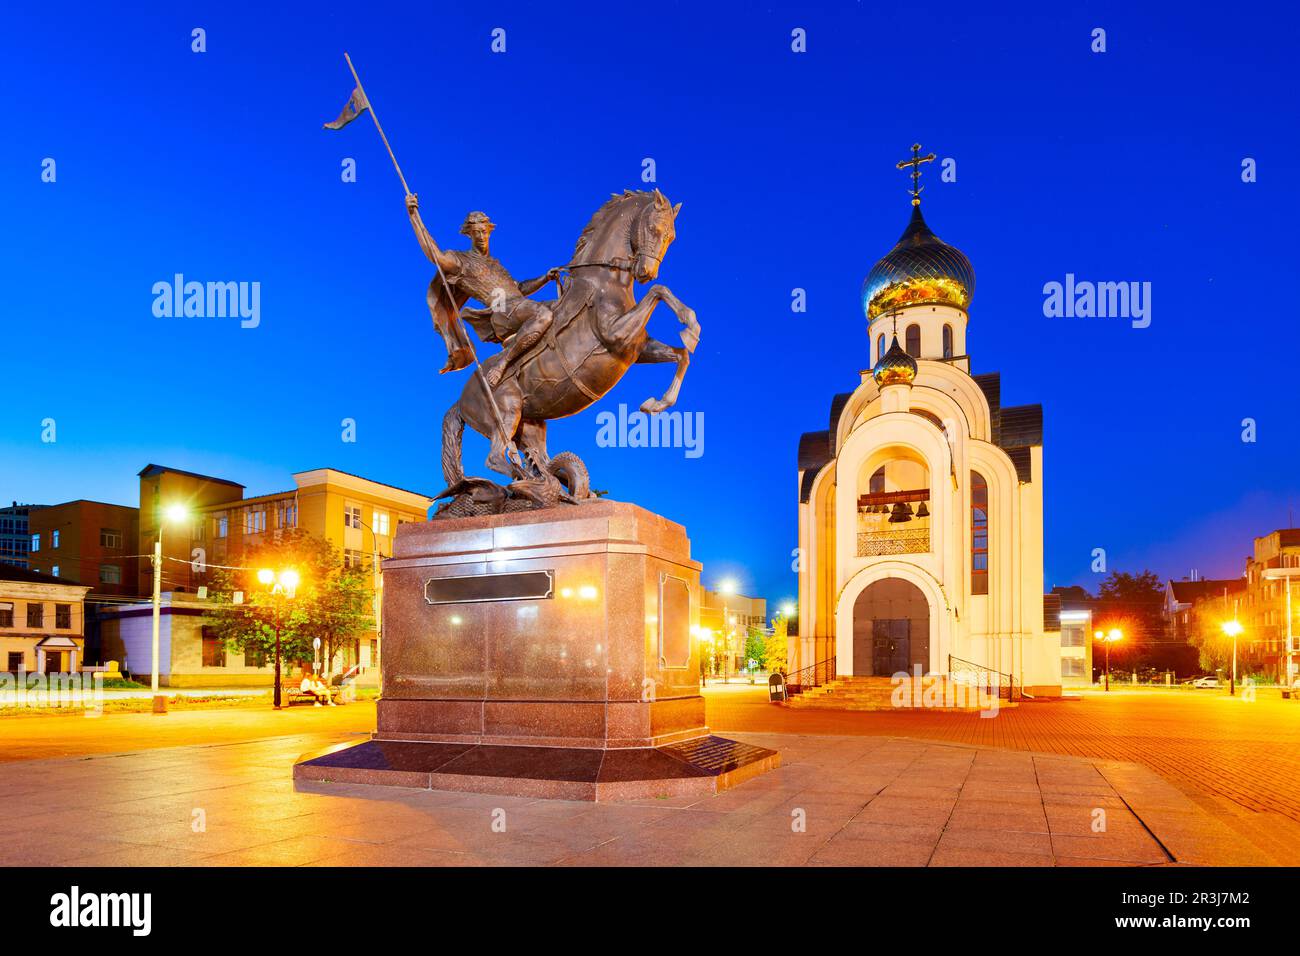 Church of St. George and The Icon of Our Lady Perishing at the Victory Square in Ivanovo city, Golden Ring of Russia at night Stock Photo